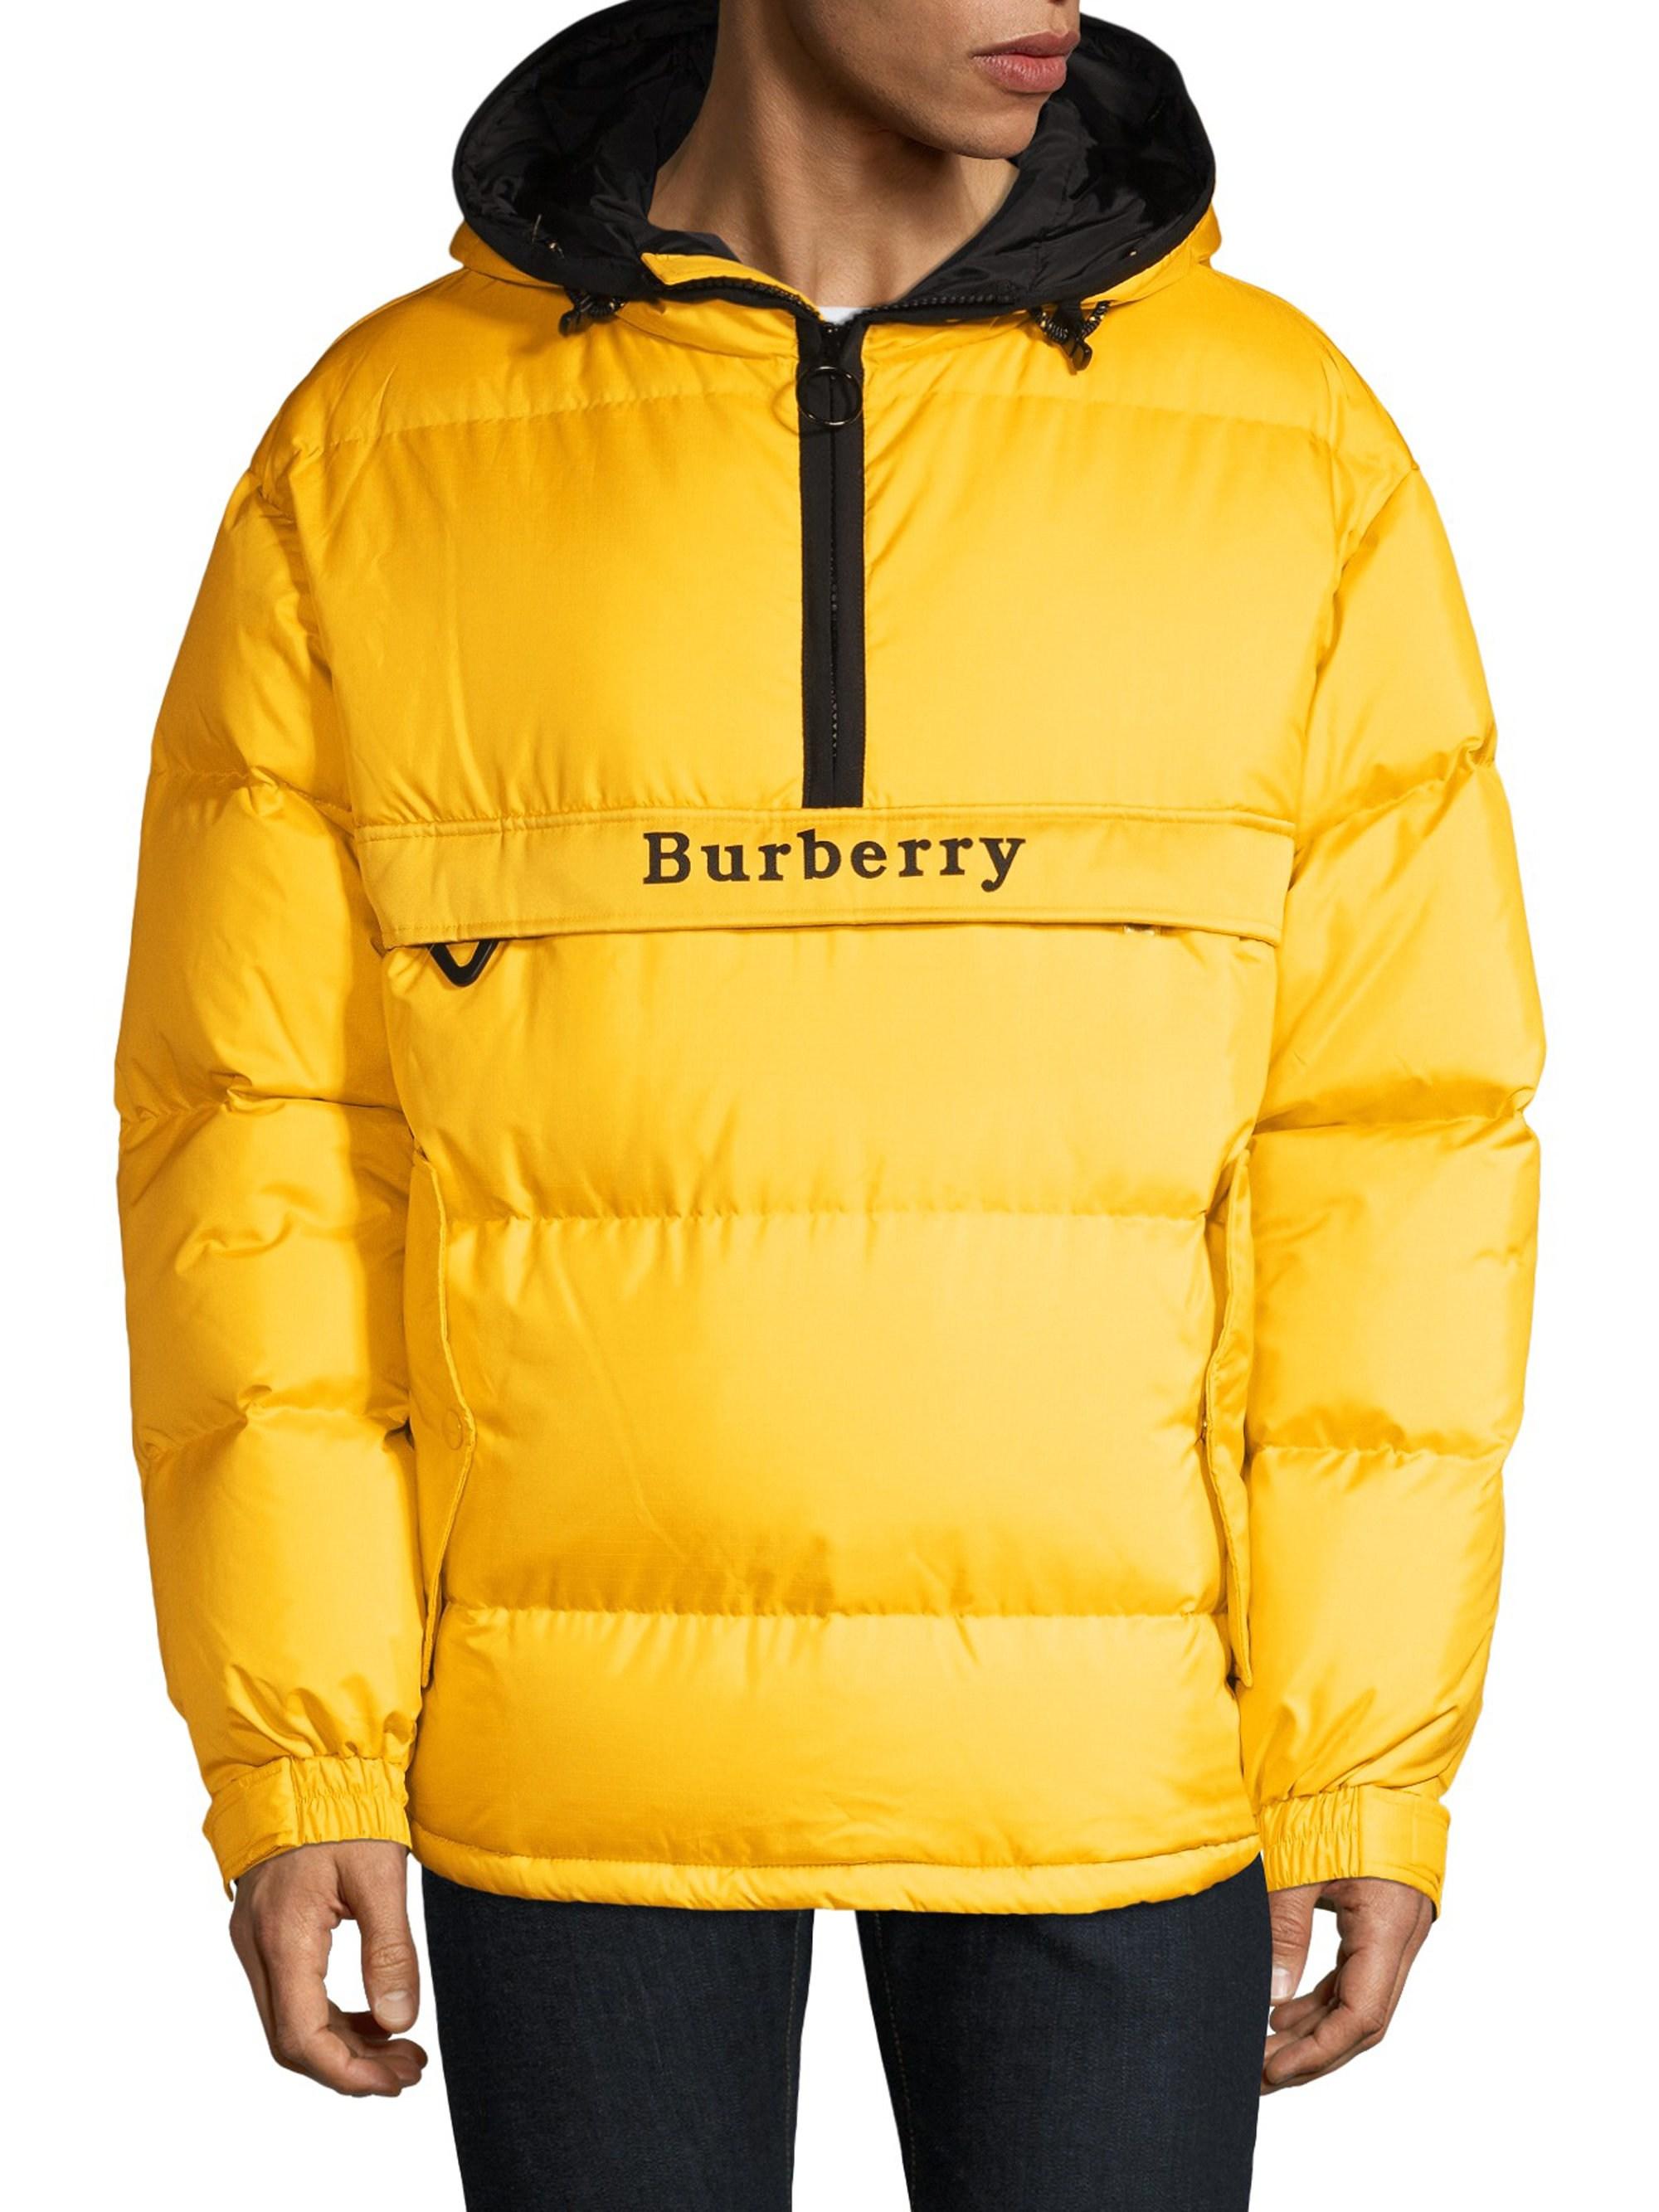 Burberry Synthetic Halstead Down Pullover Jacket With Detachable Mittens in  Bright Yellow (Yellow) for Men - Lyst